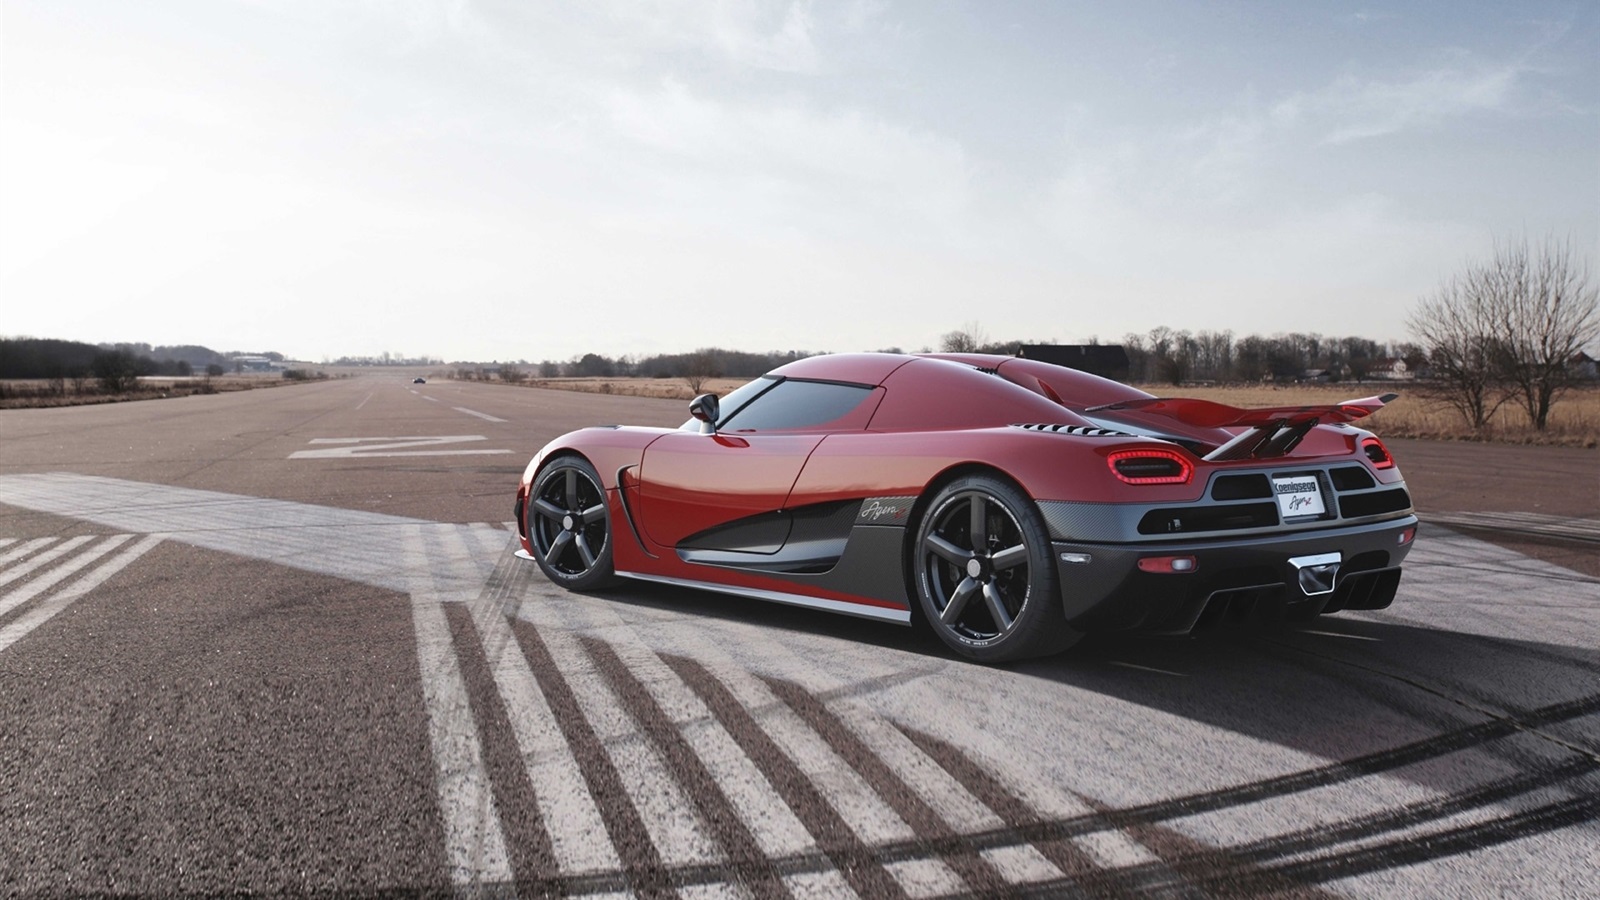 Koenigsegg cooperates with Chinese investor to expand in electric car market.